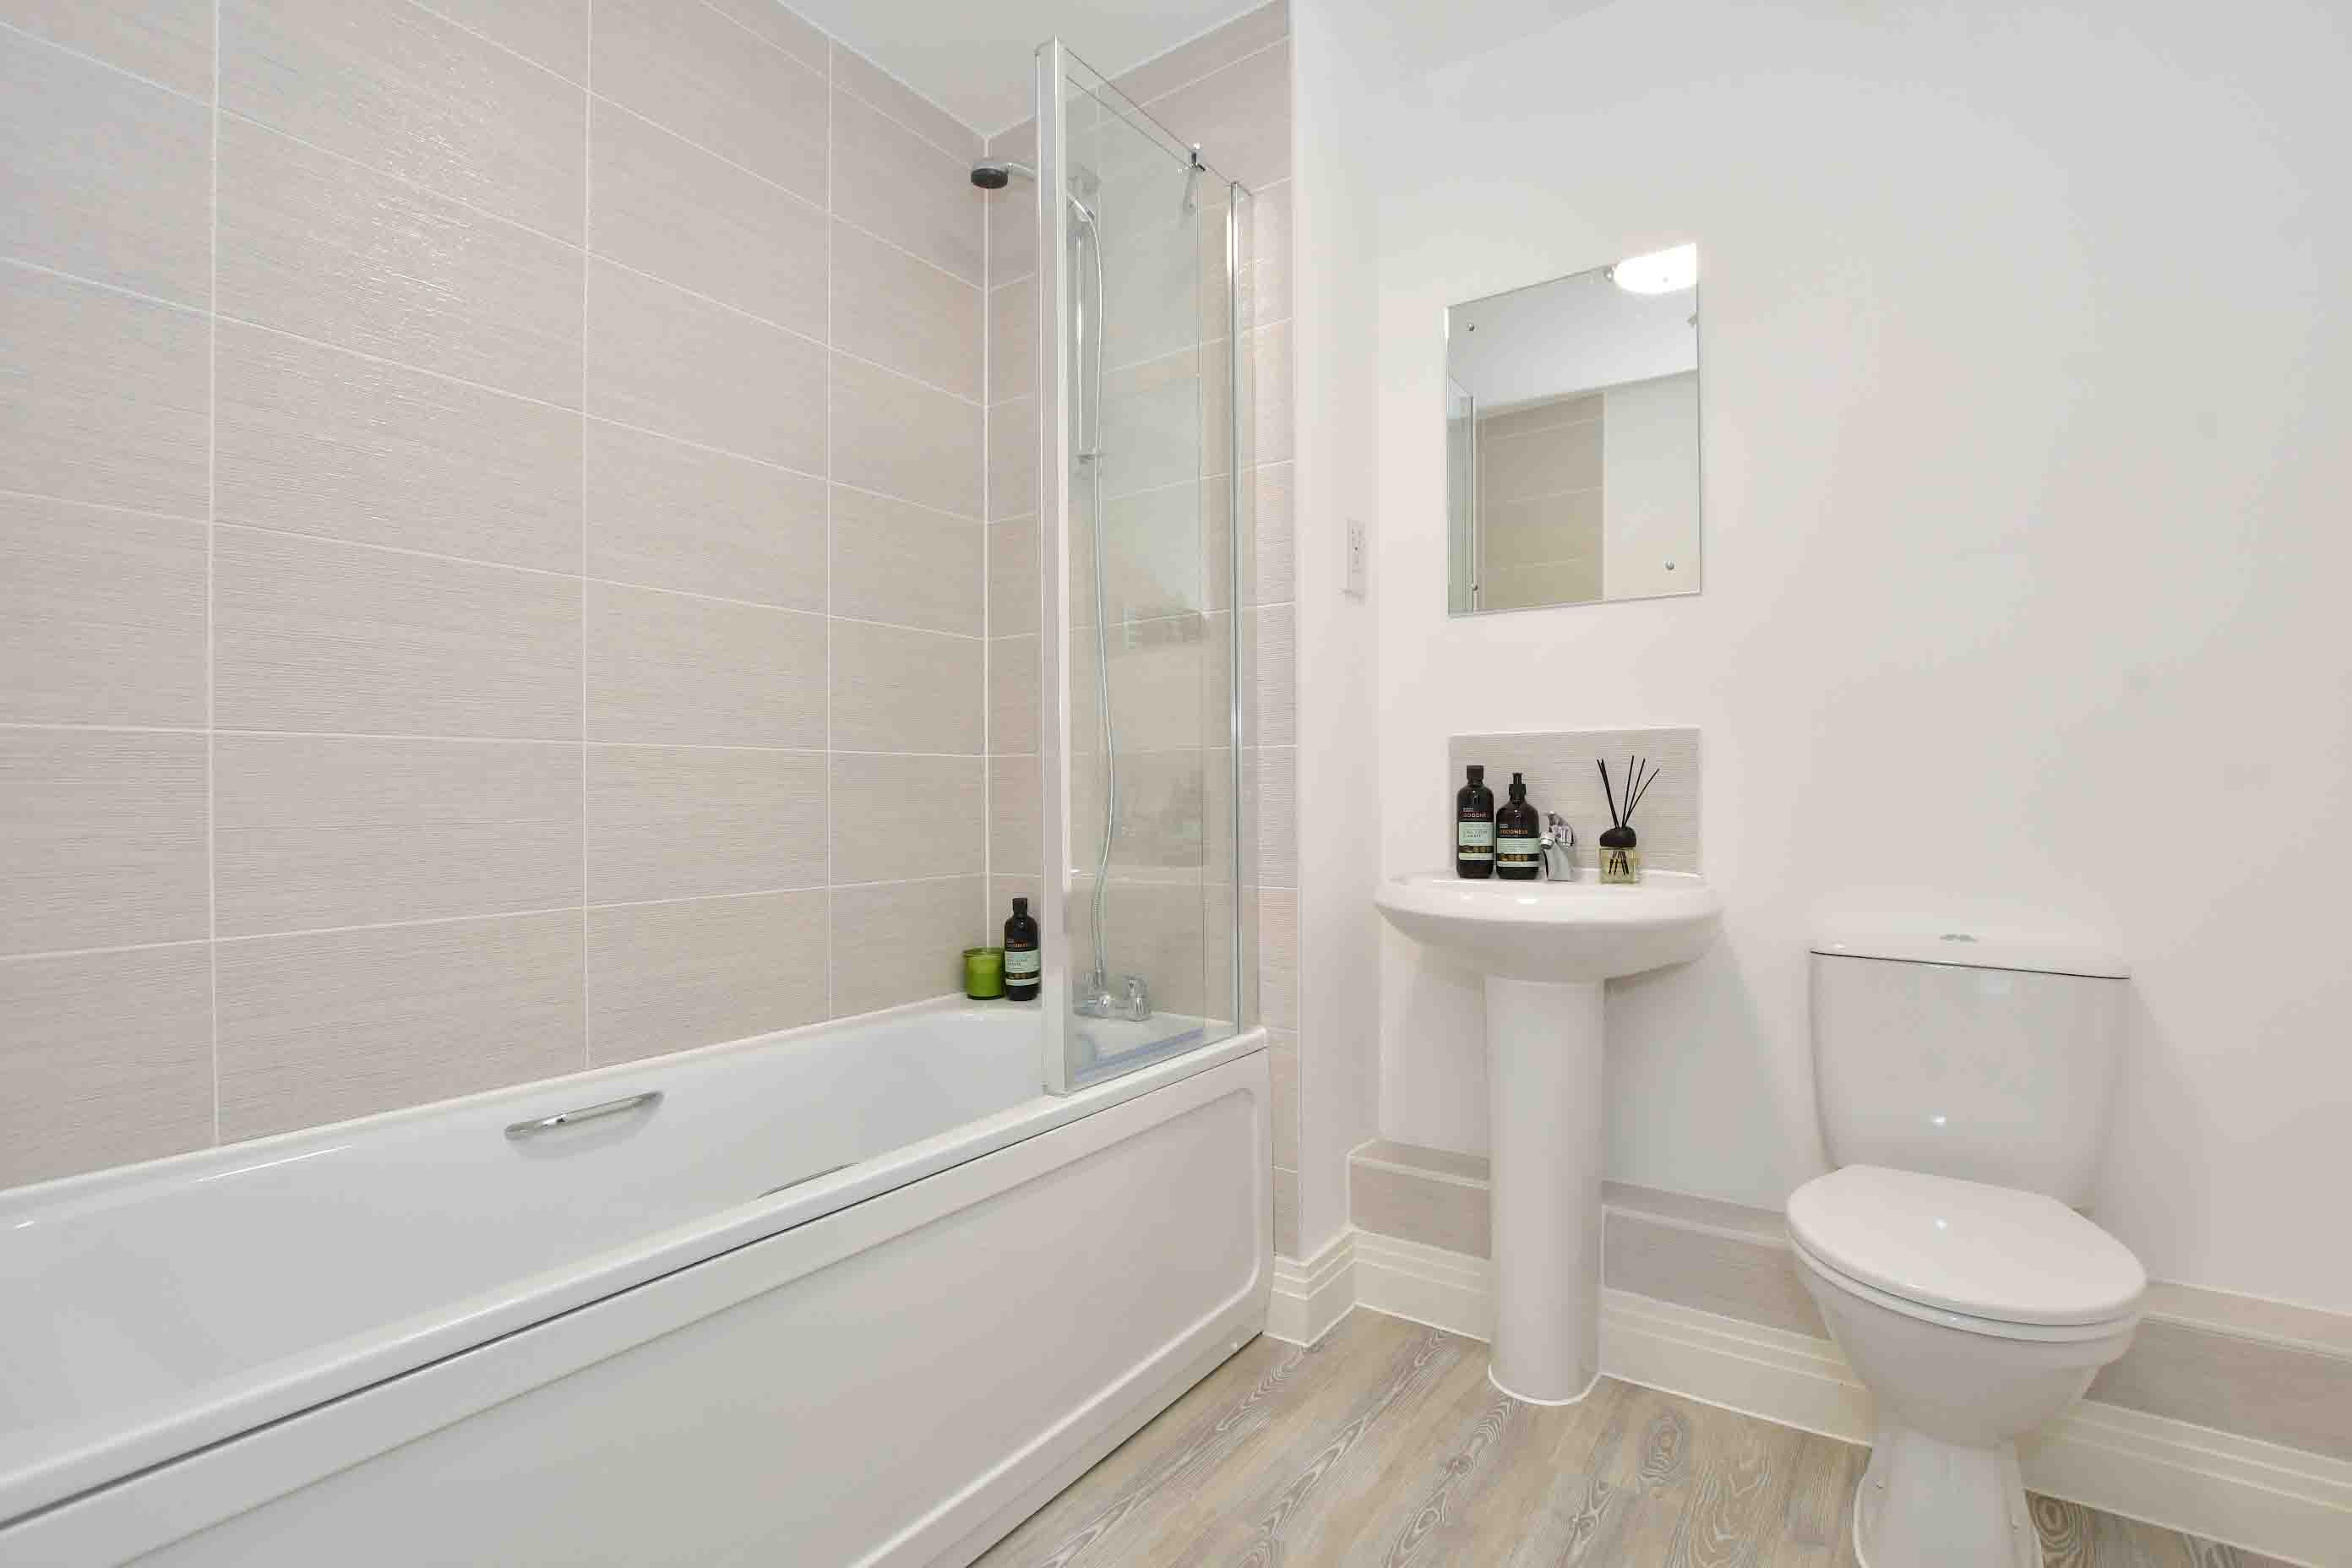 Bathroom at Kings Barton shared ownership apartment in Winchester